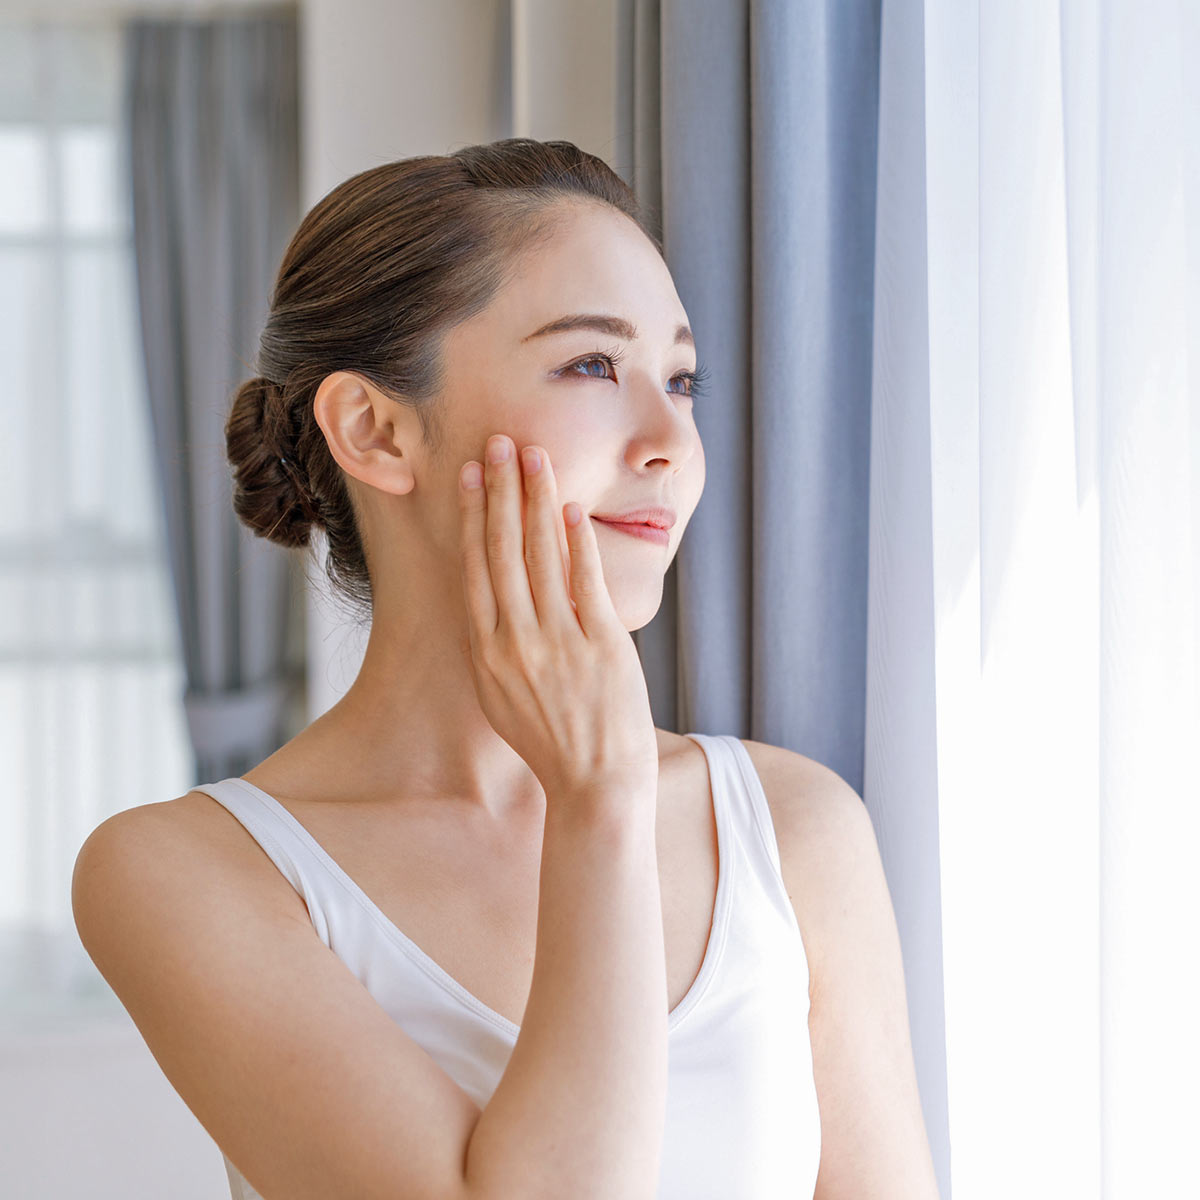 A young asian woman in a tank top looks out a window while smiling thoughtfully.